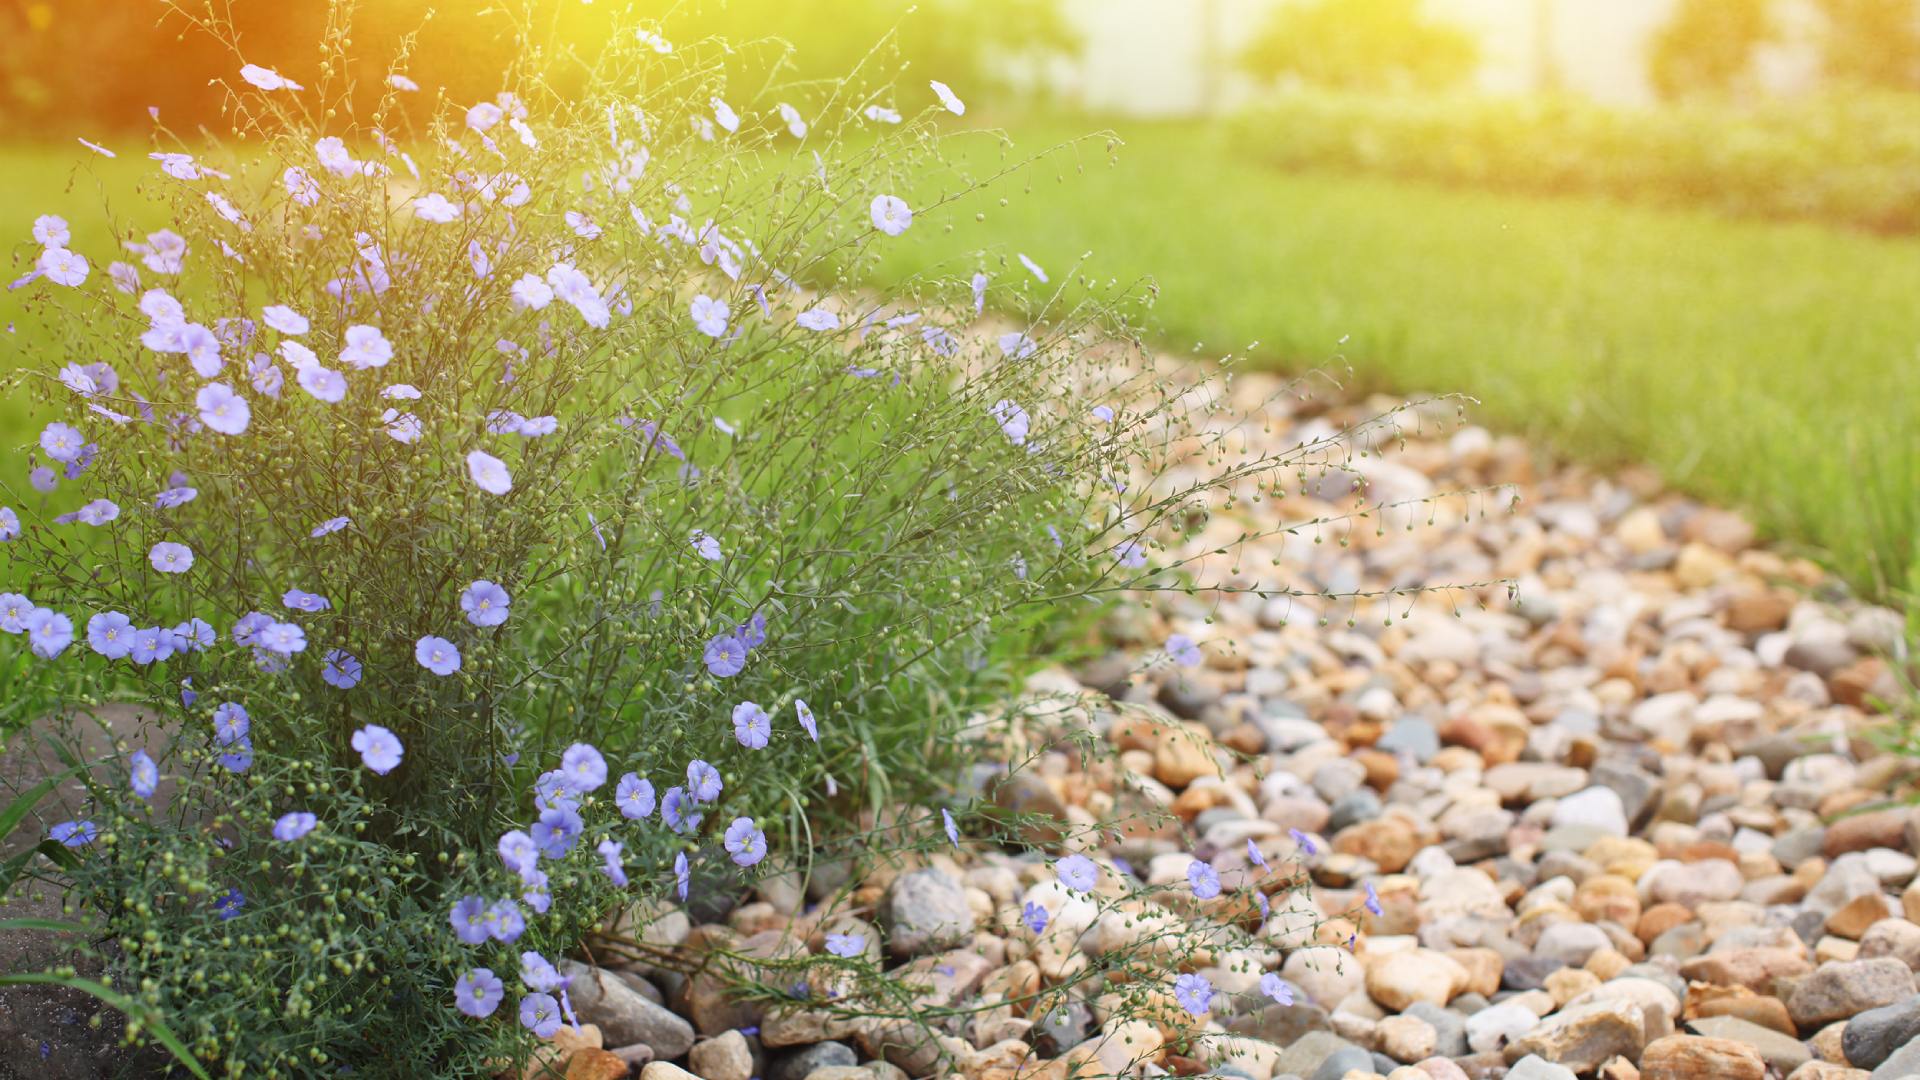 Drainage Solutions: Should You Install a Dry Creek Bed or a French Drain?